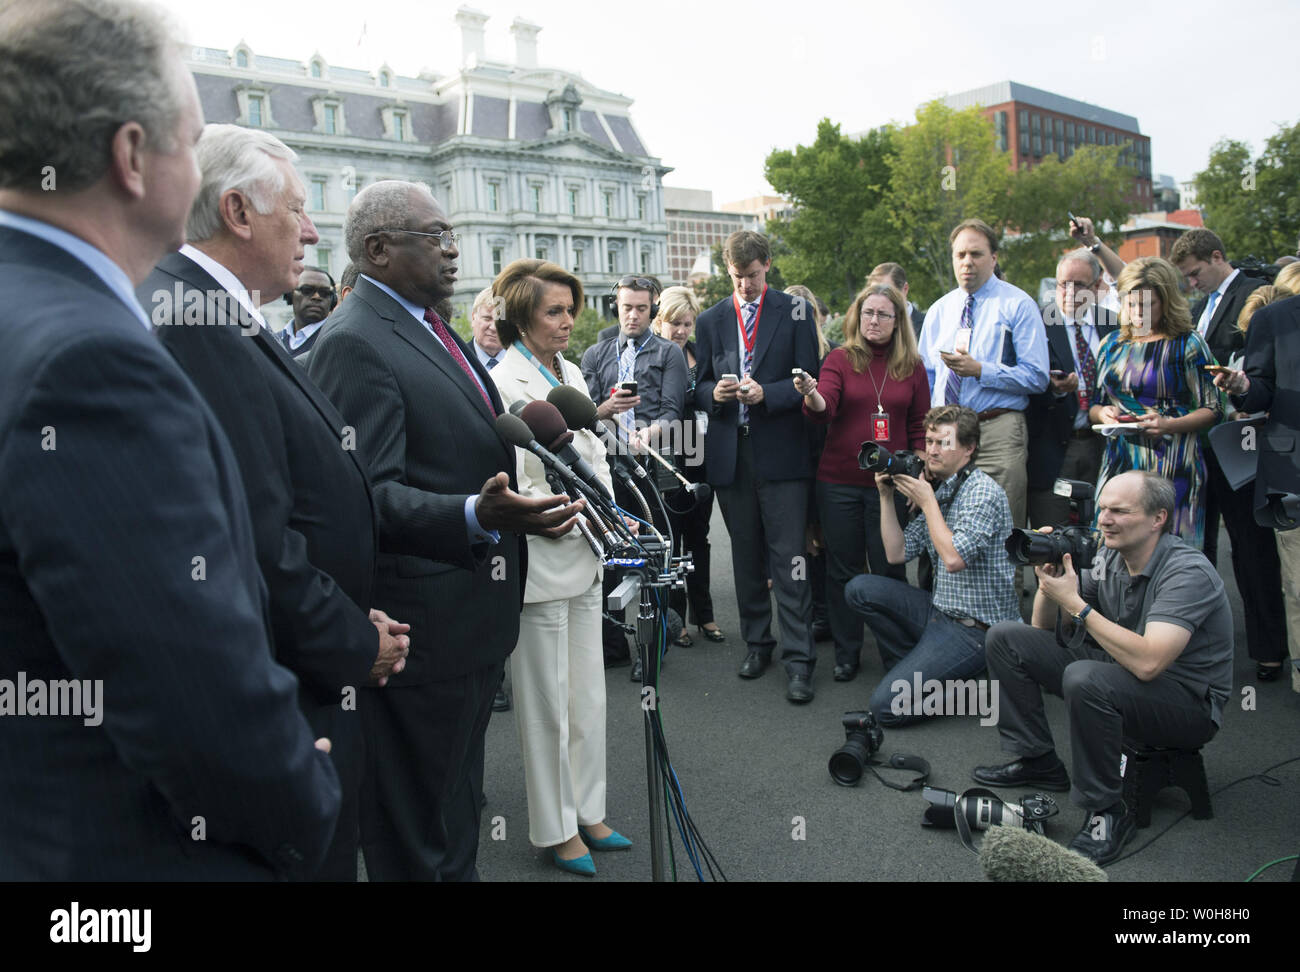 Rep. Jame Clyburn (R-SC) speaks to the media following a meeting with President Barack Obama on the debt limit and reopening the government at the White House in Washington, D.C. on October 15, 2013. Clyburn was joined by, from left to right, Rep. Chris Van Hollen (D-MD) House Minority Whip Steny Hoyer (D-MD) and House Minority Leader Nancy Pelosi (D-CA). UPI/Kevin Dietsch Stock Photo